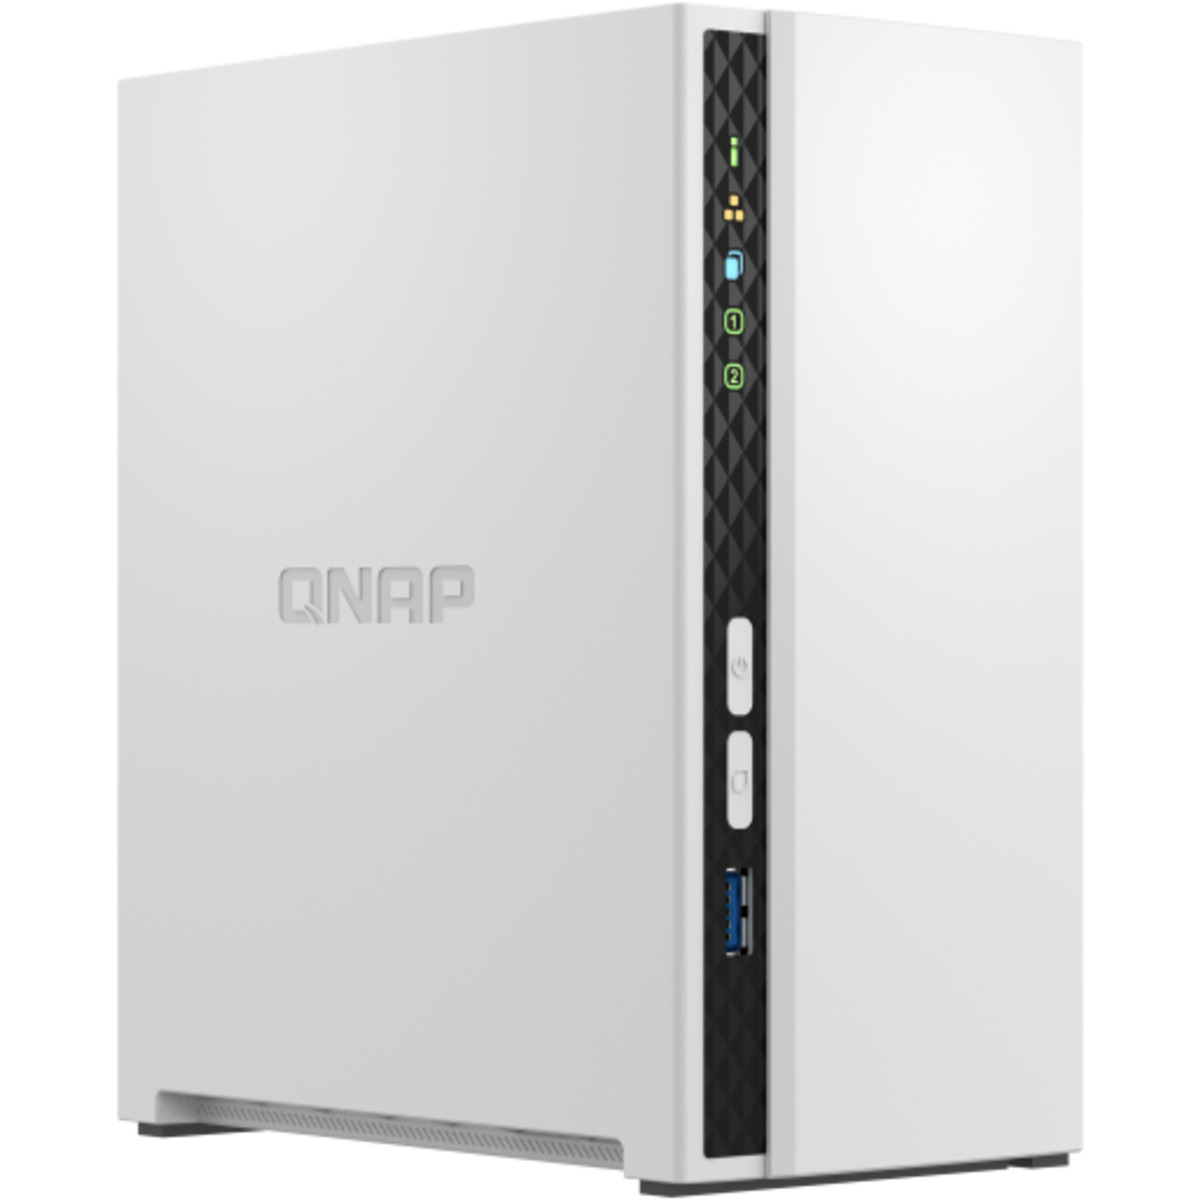 QNAP TS-233 18tb 2-Bay Desktop Personal / Basic Home / Small Office NAS - Network Attached Storage Device 1x18tb Seagate IronWolf Pro ST18000NT001 3.5 7200rpm SATA 6Gb/s HDD NAS Class Drives Installed - Burn-In Tested TS-233